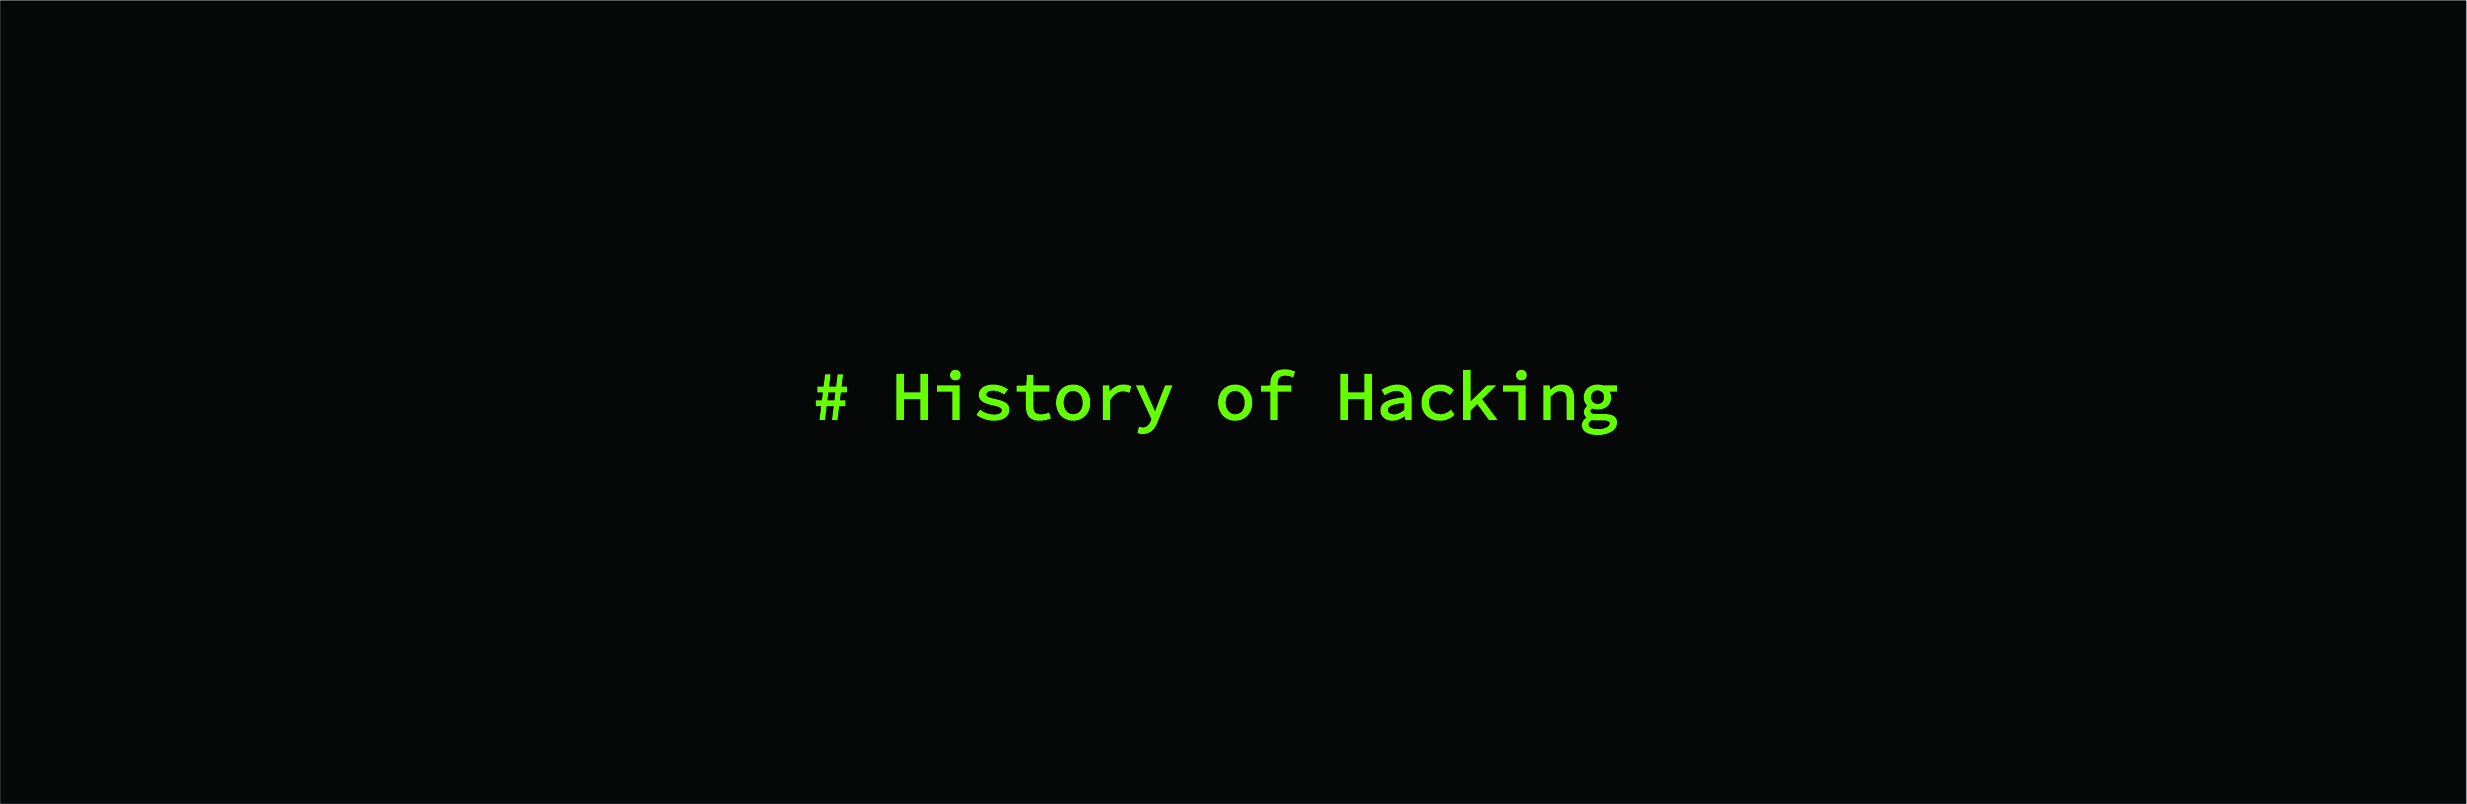 history of hacking